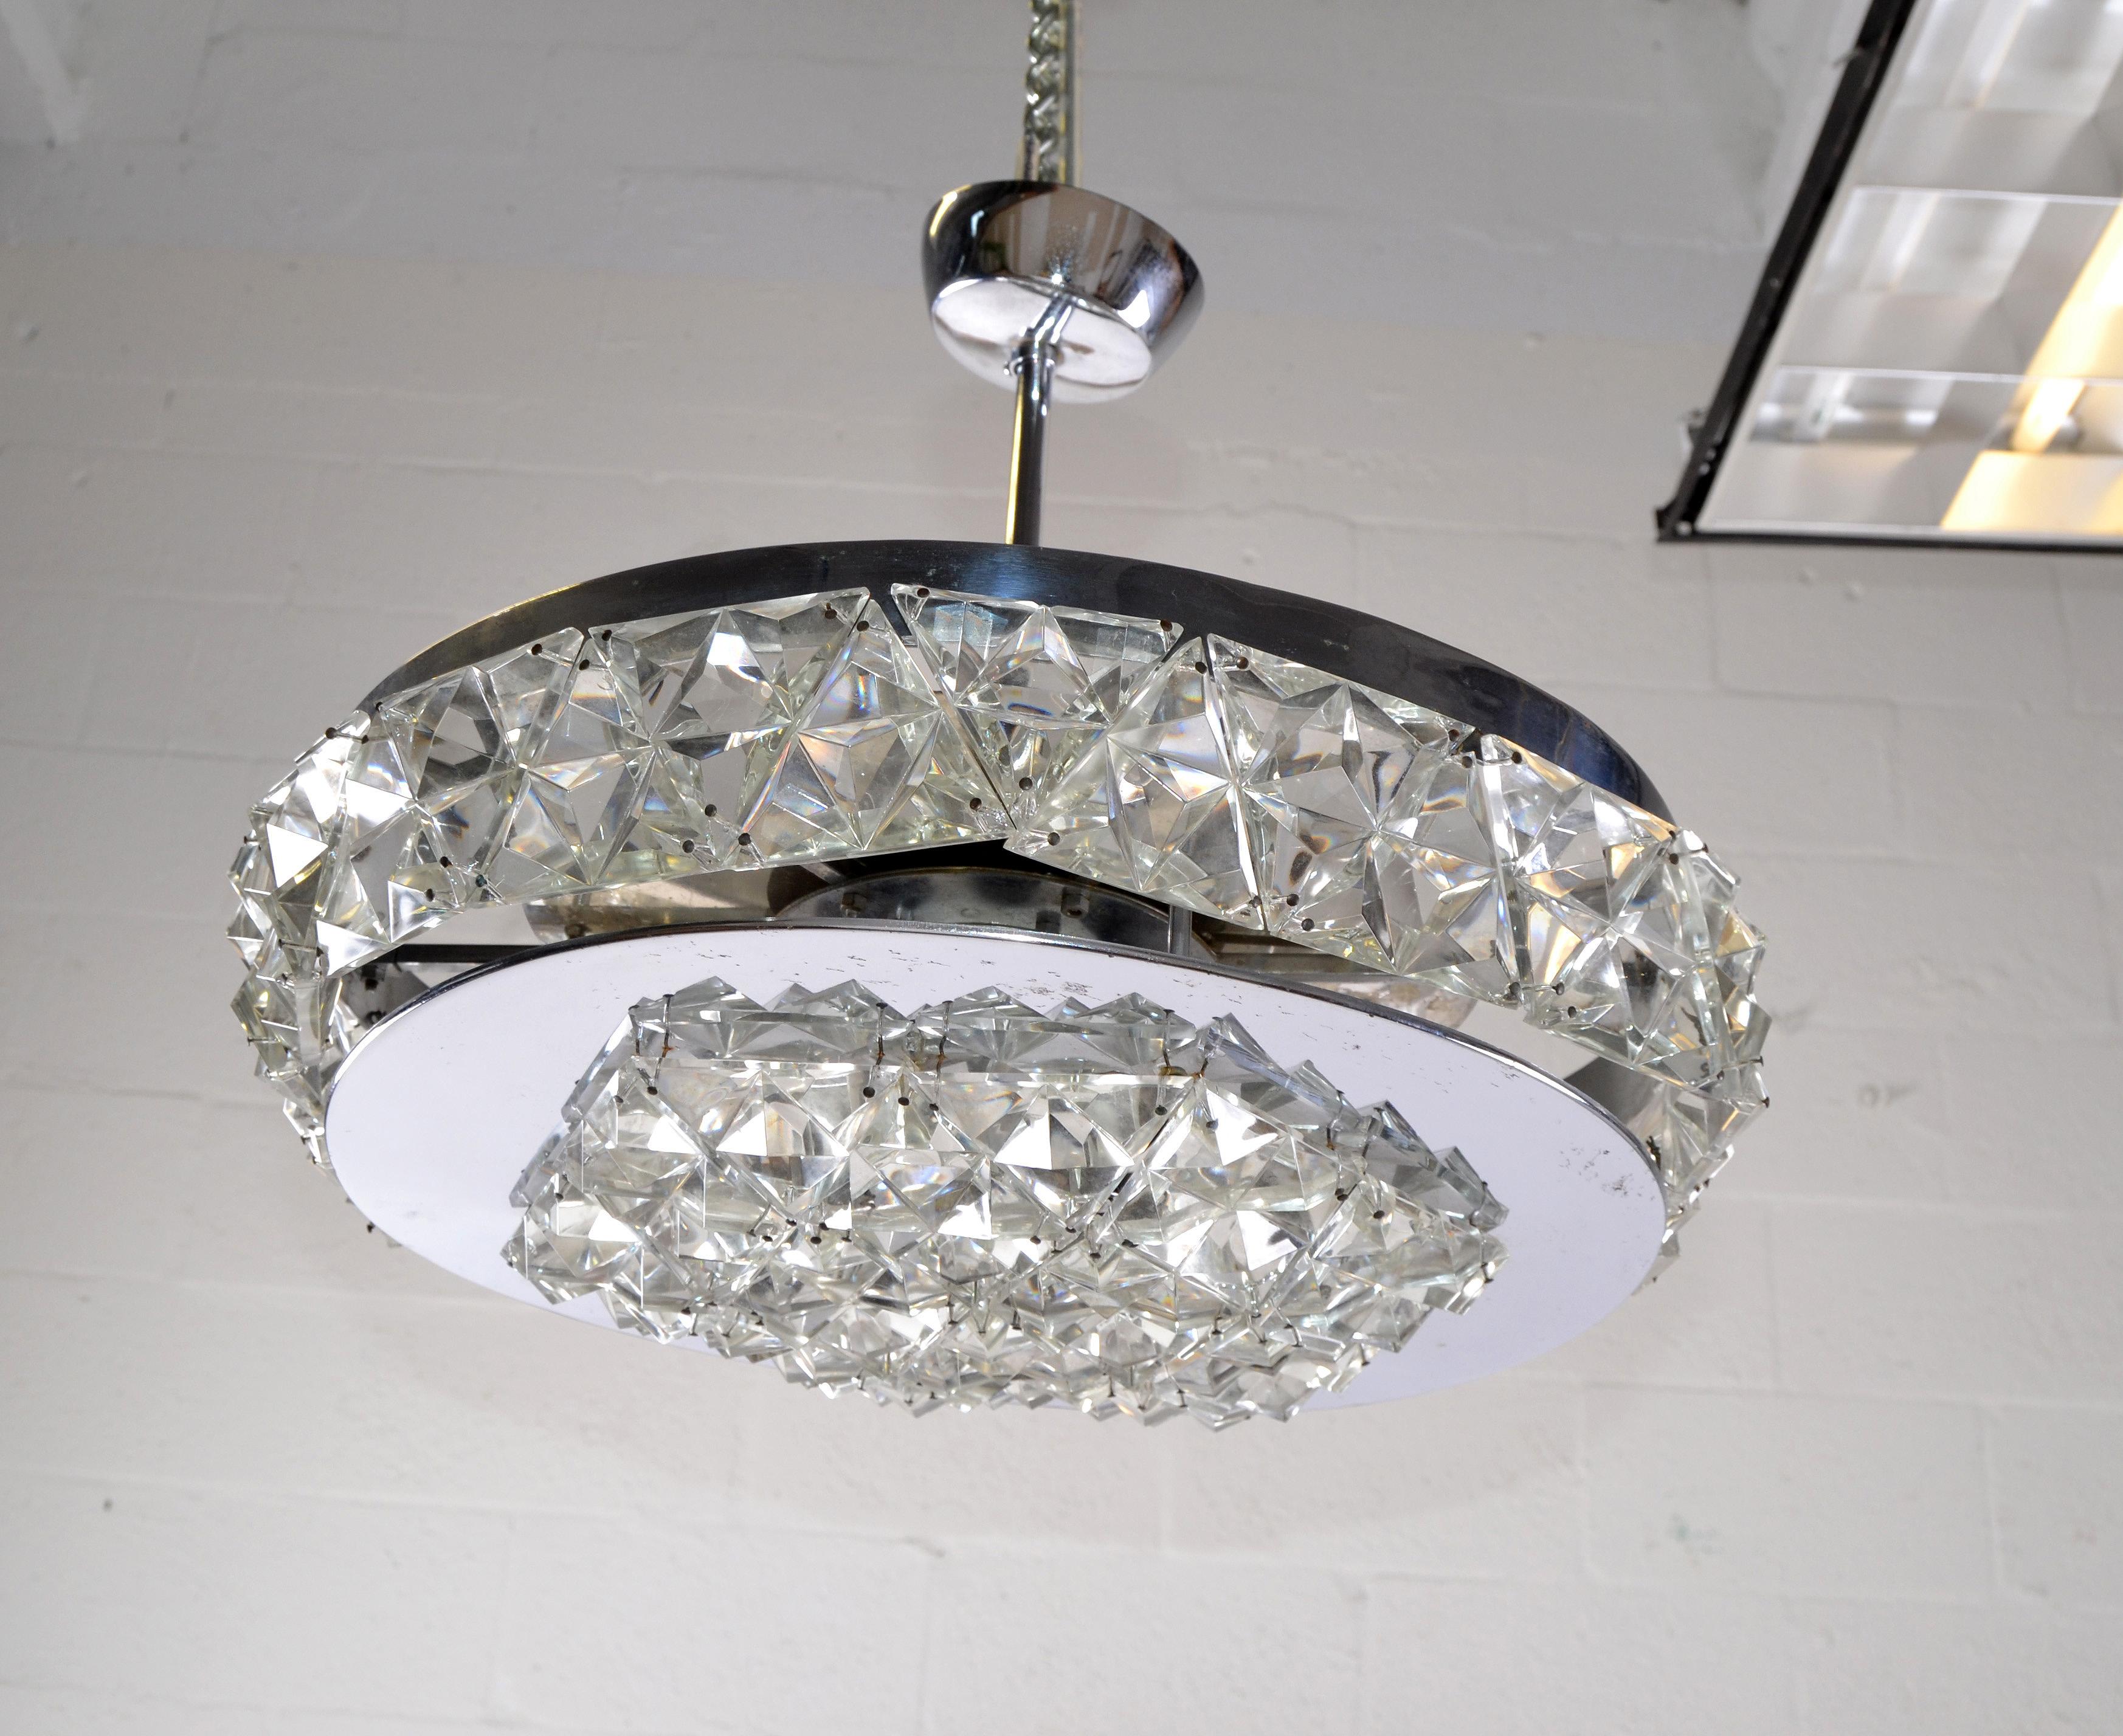 Mid-Century Modern Chrome and Crystal Flushmount Ceiling Light Fixture, 1970s For Sale 2